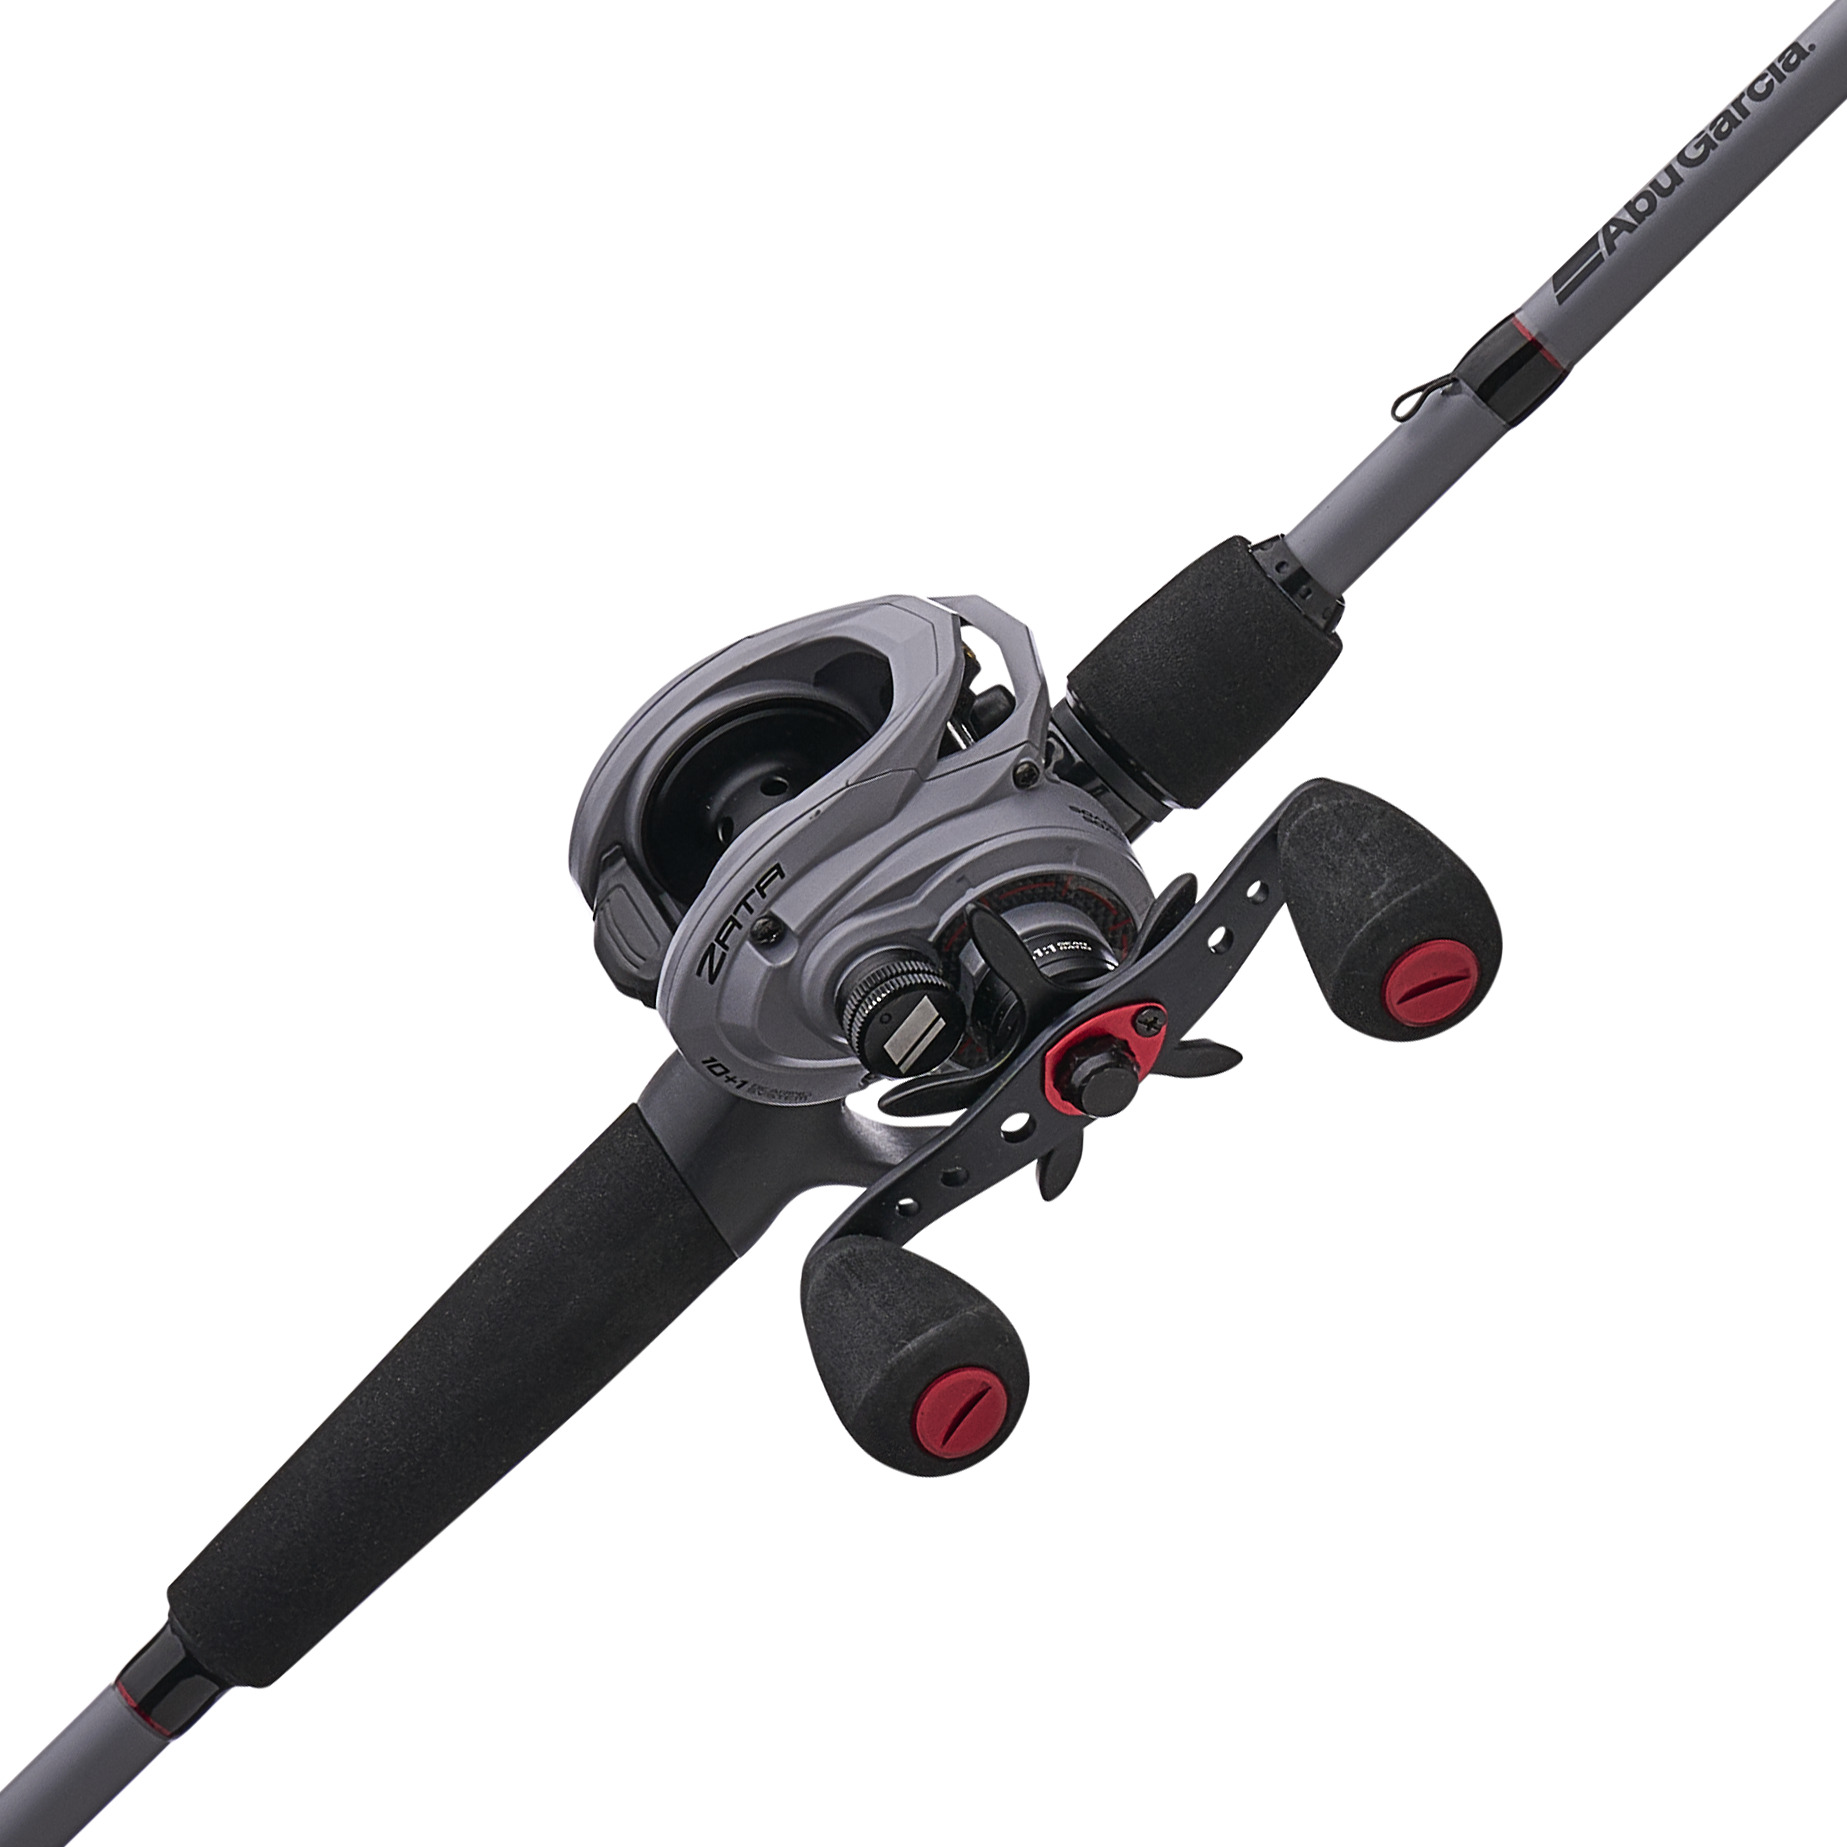 Abu Garcia Zata Reels and Combos Return With All New Look and